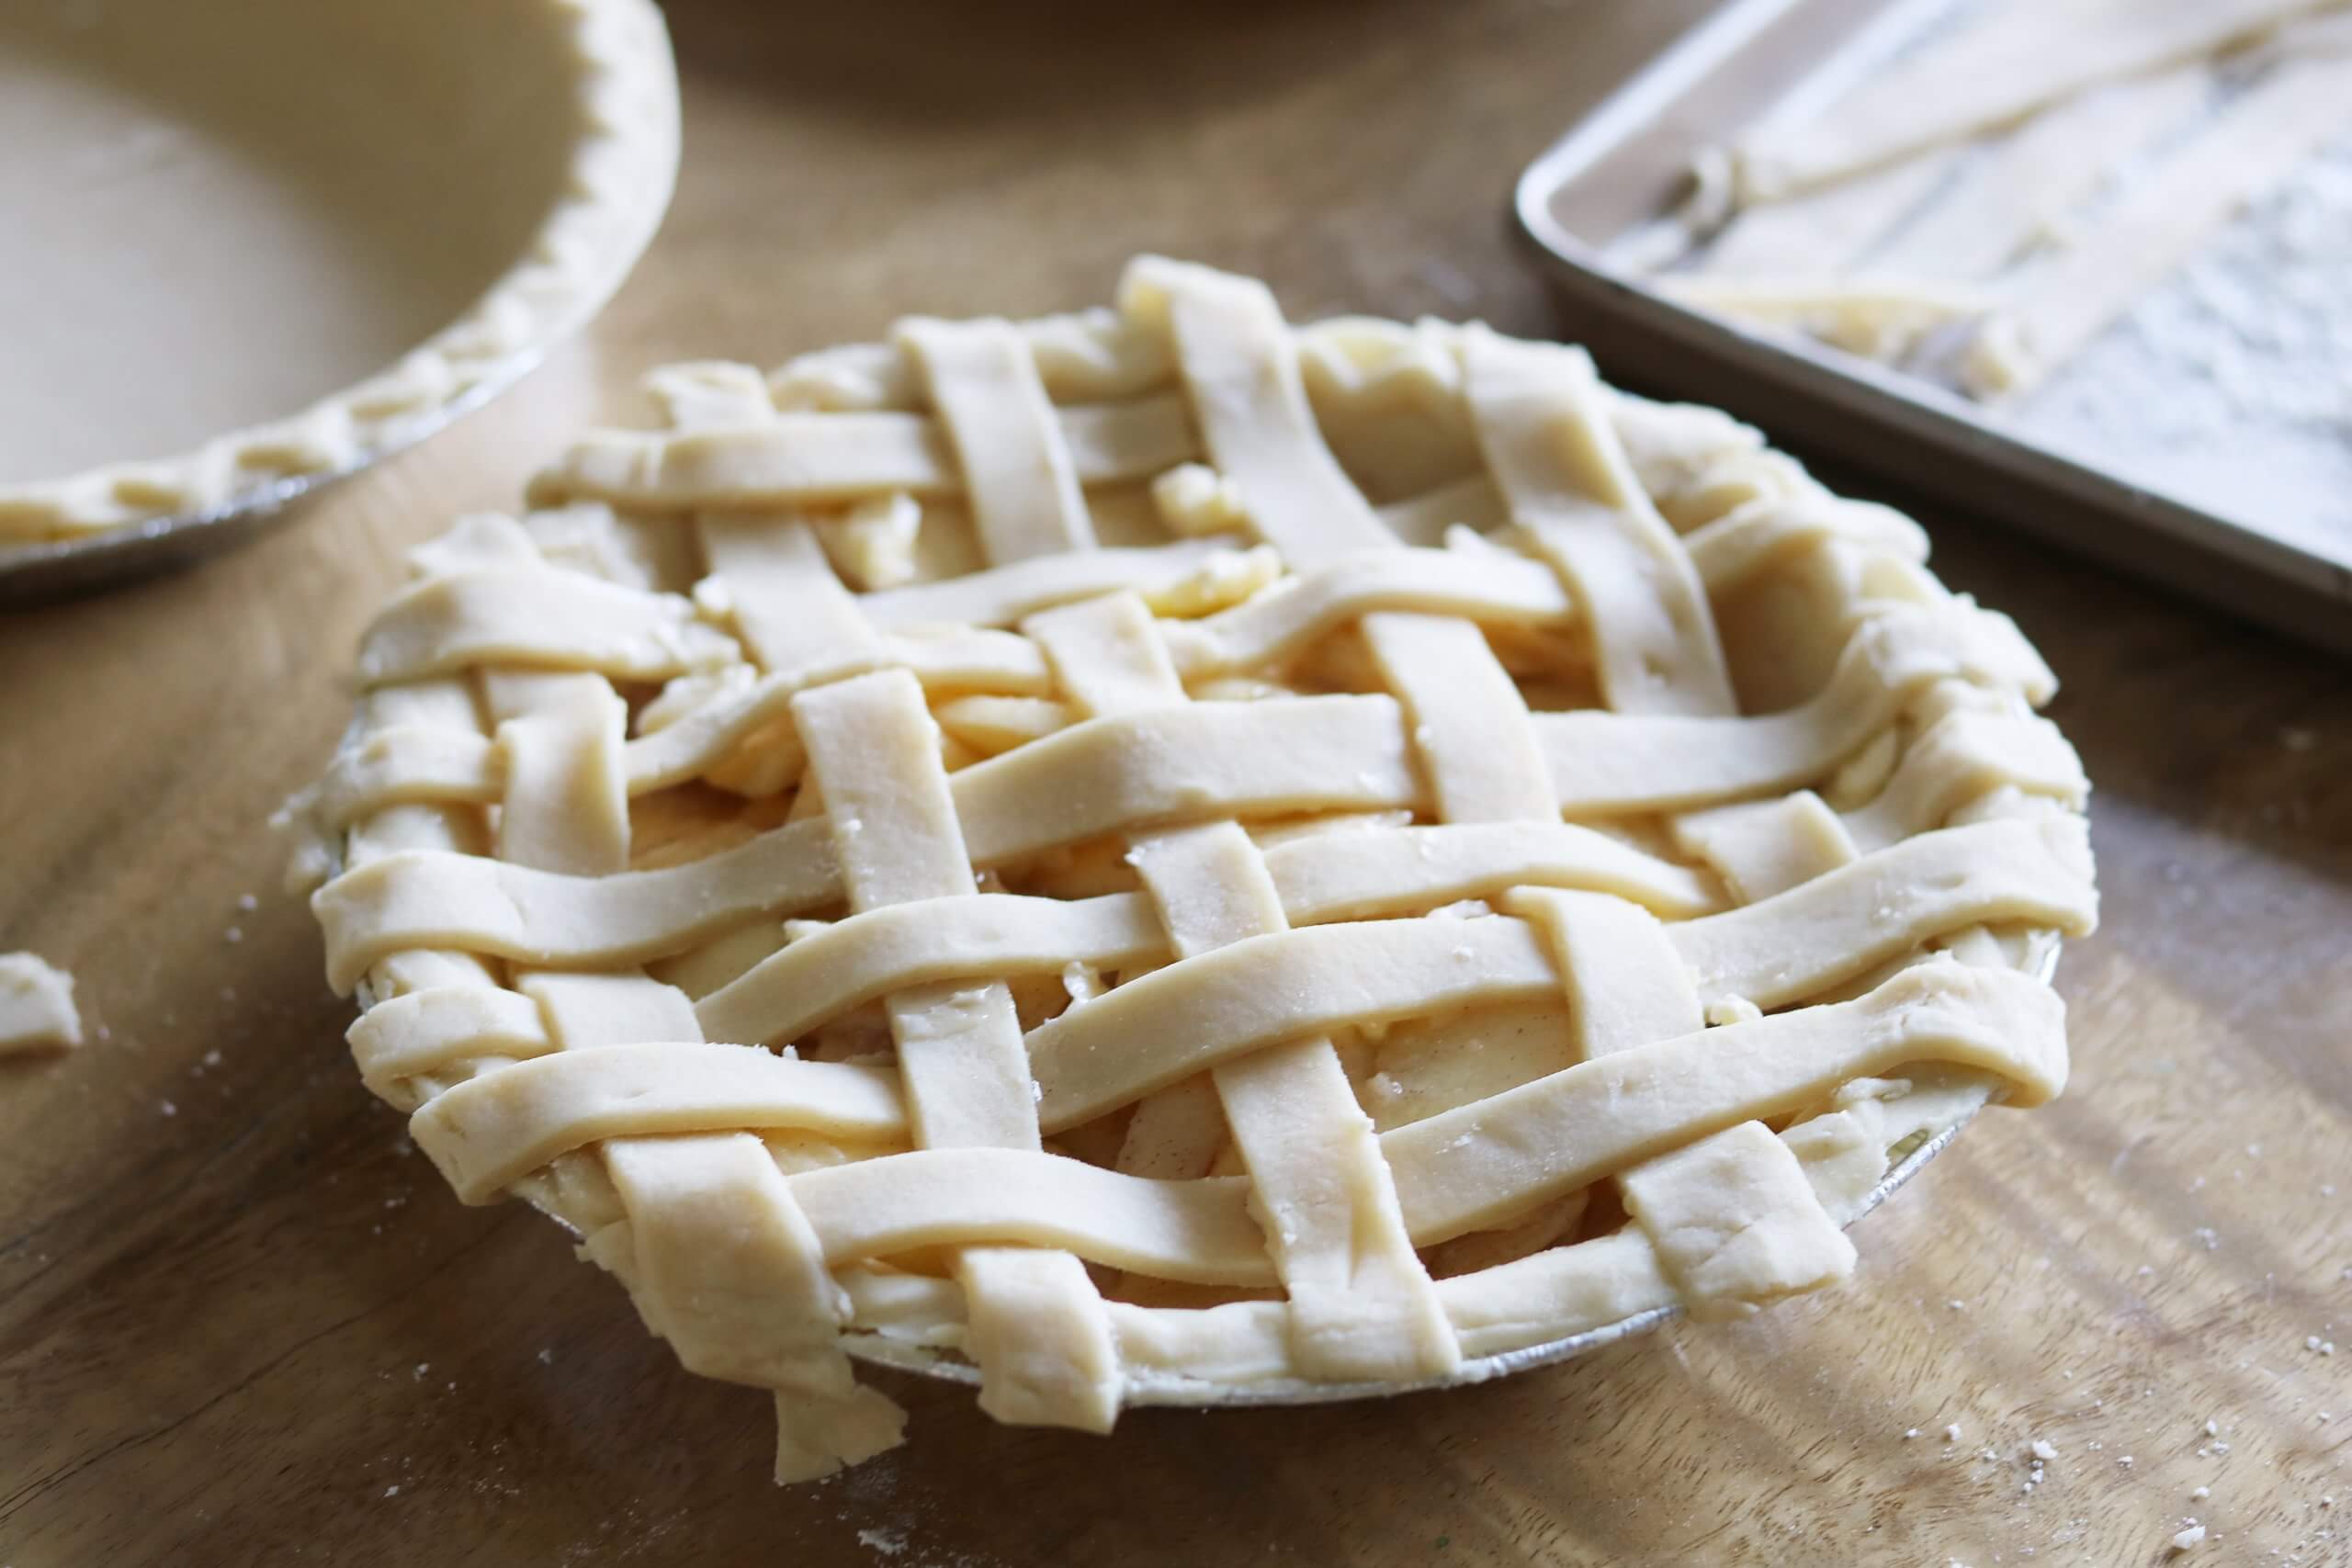 Apple Pie Cheat Recipe!  Quick and easy apple pie with a pretty crust design